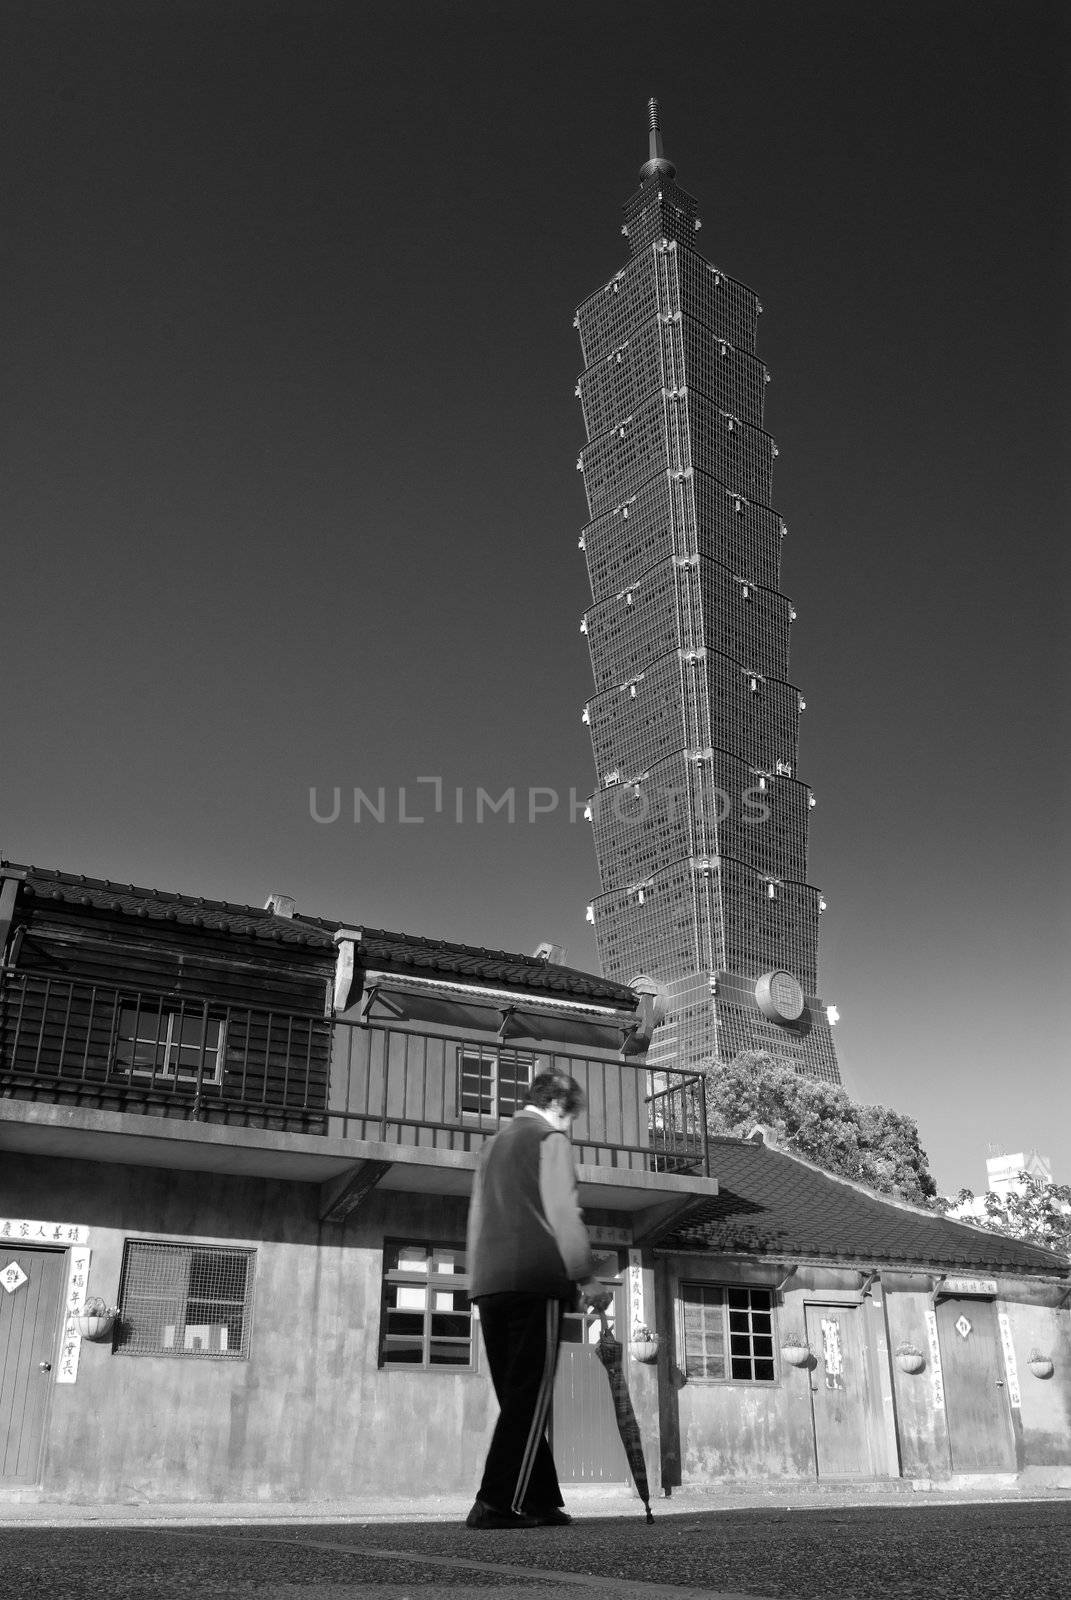 Taipei 101 was a famous landmark in world. In front of this skyscraper was an old community. Another renewal scenery in morden city. In this picture, did aged woman walk and not stop mean the history not go back ?